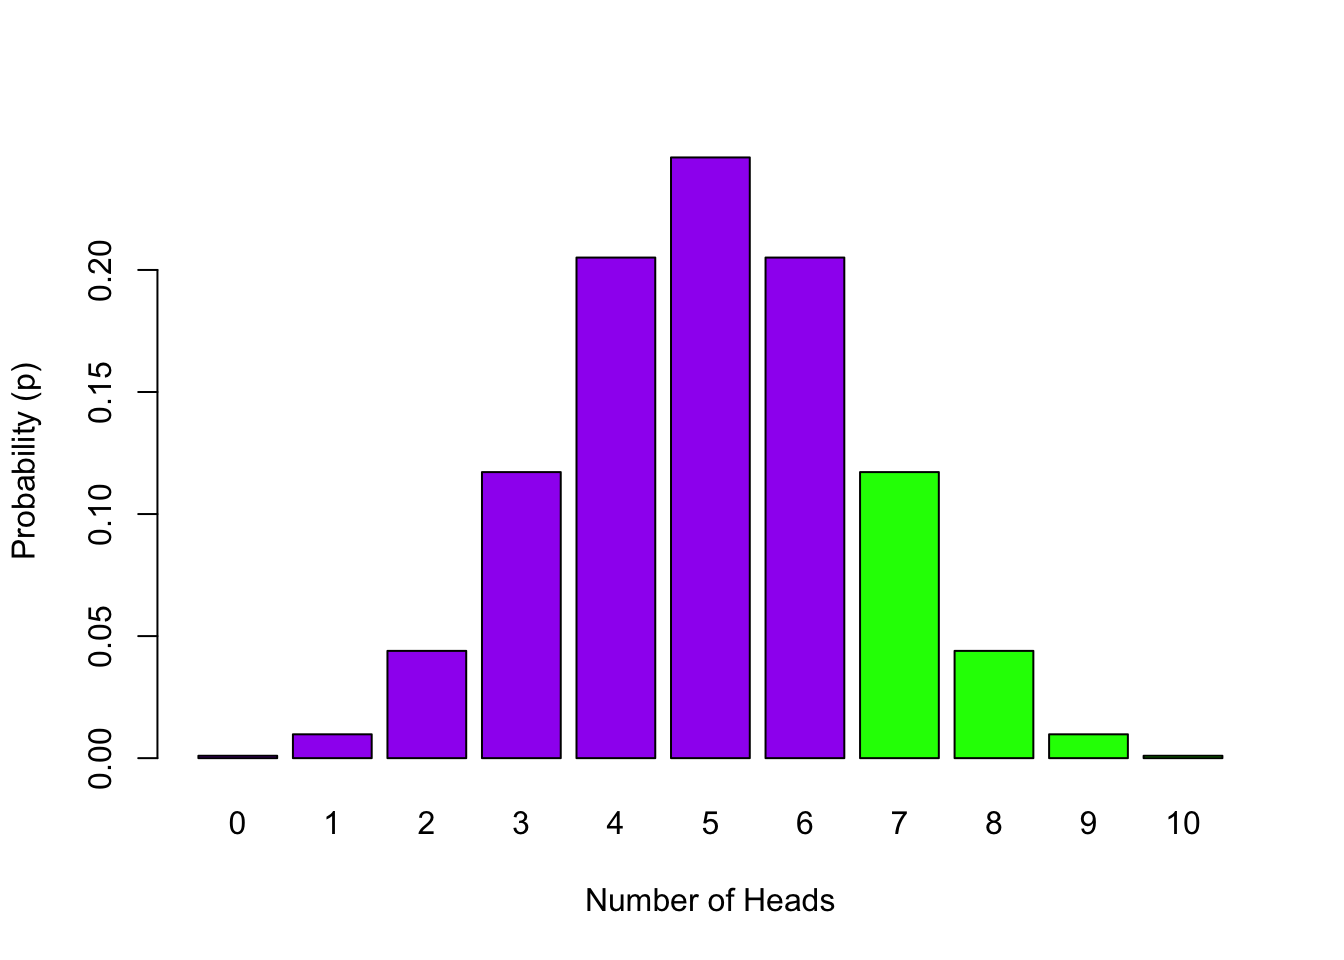 Probability Distribution of Number of Heads in 10 Flips with the probability of 7 or more Heads highlighted in green - `lower.tail = FALSE`